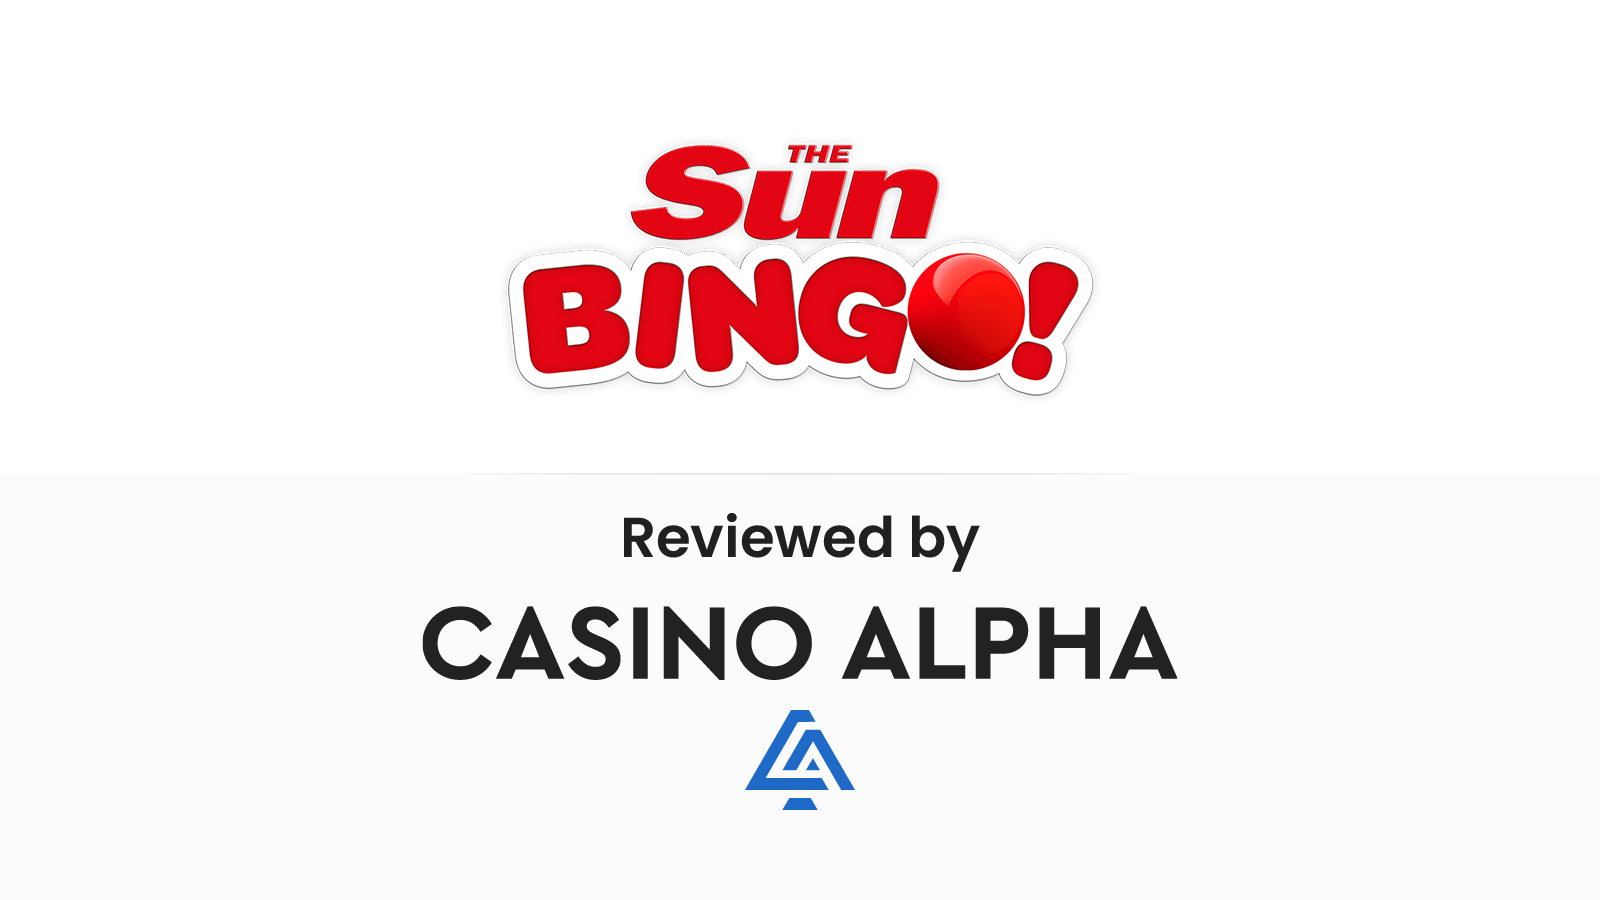 Should Fixing sun bingo wagering requirements explained Take 55 Steps?